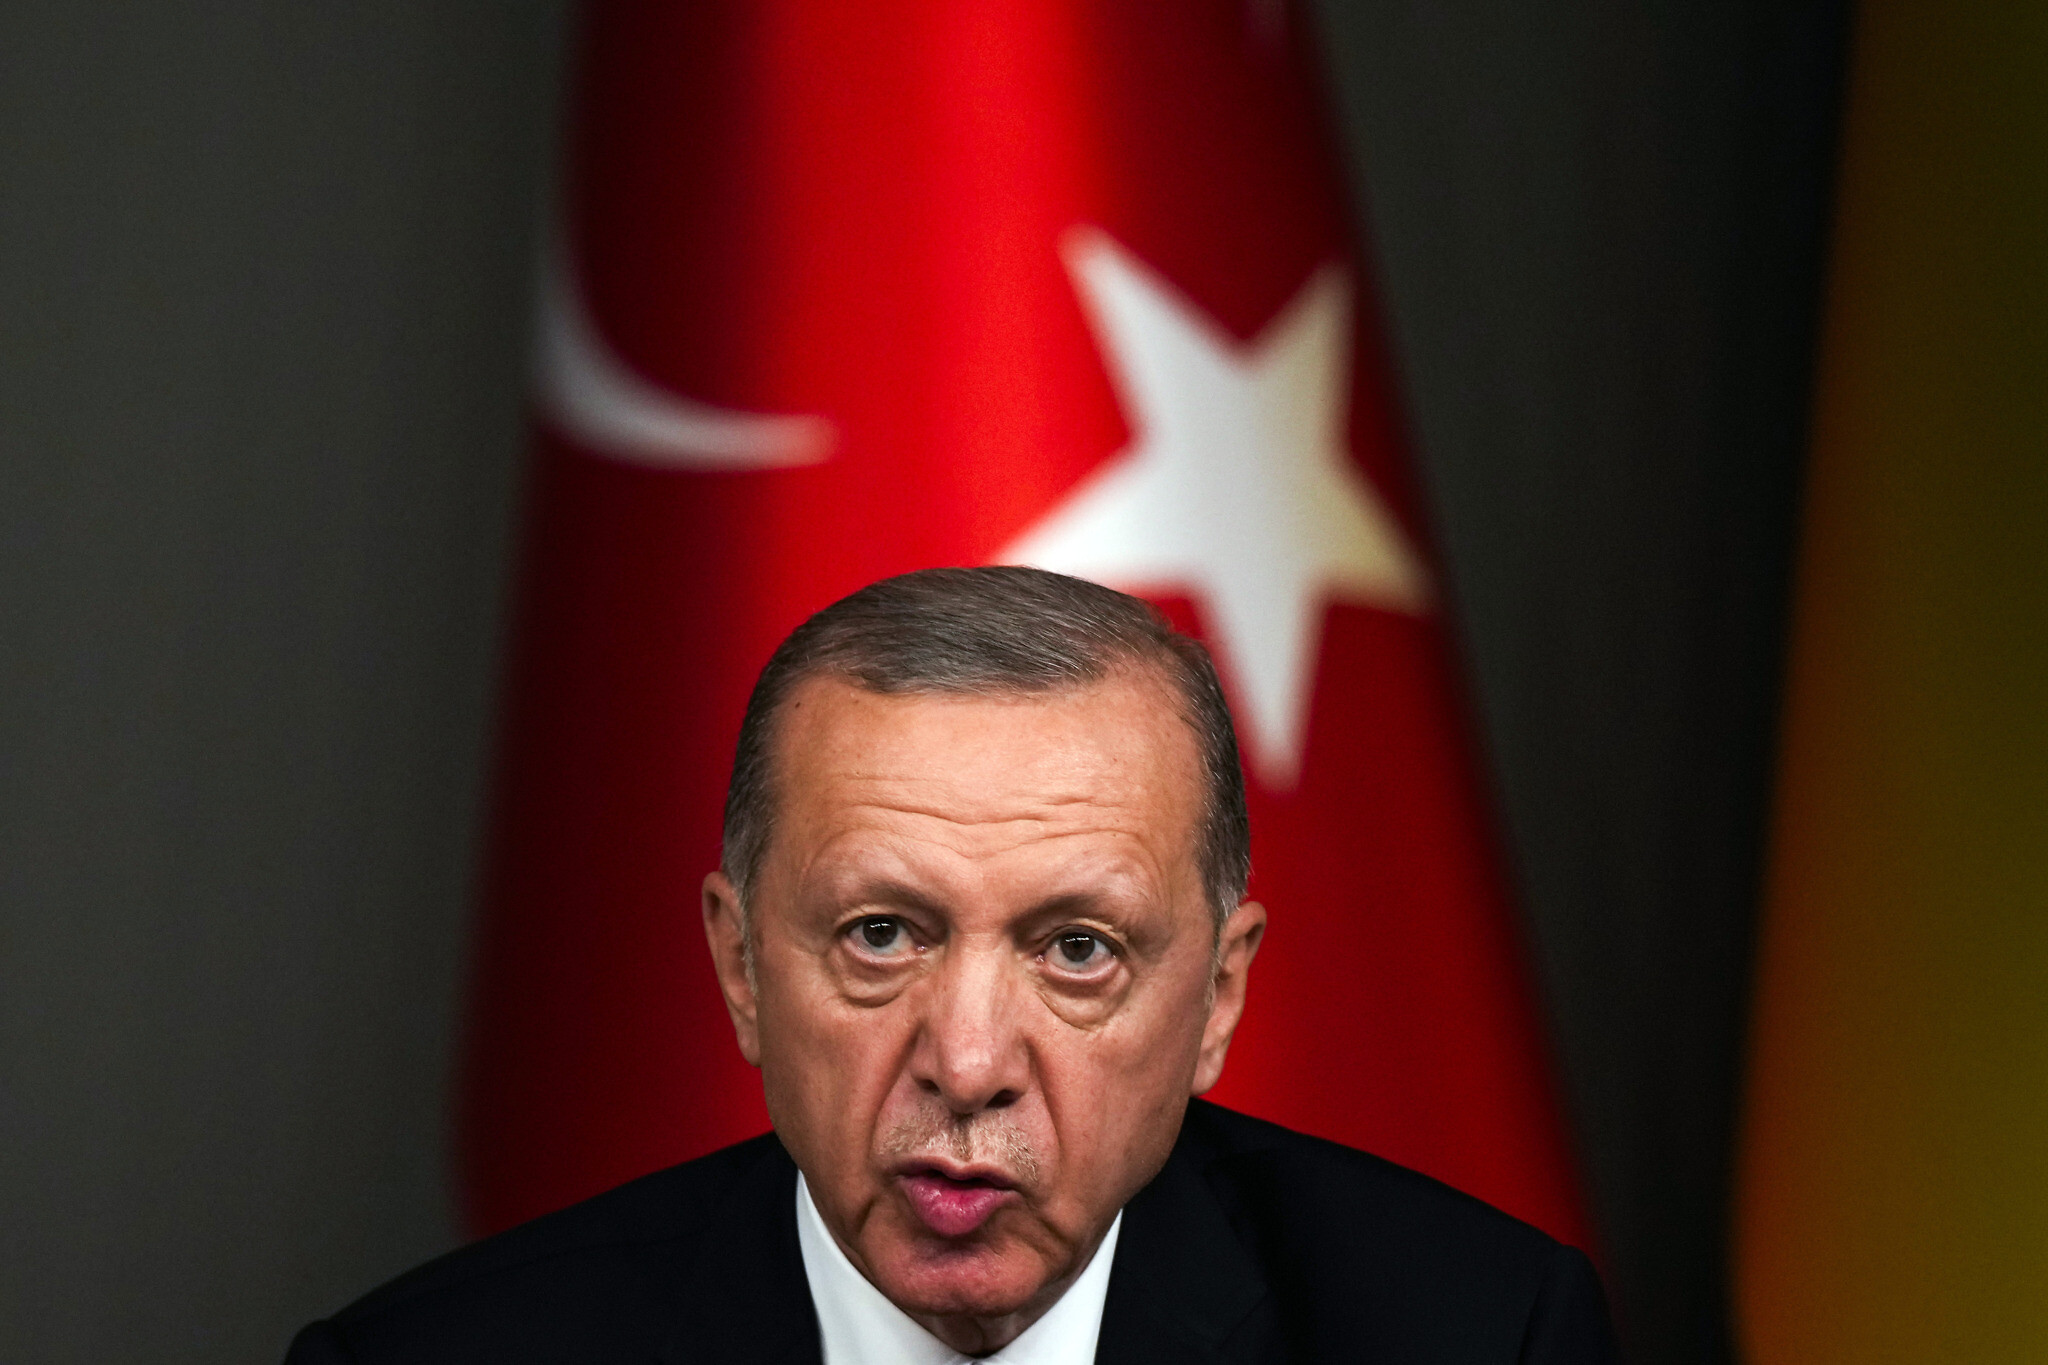 Erdogan: For Sweden to join NATO, Europeans should 'open way' to Turkey's EU  bid | The Times of Israel